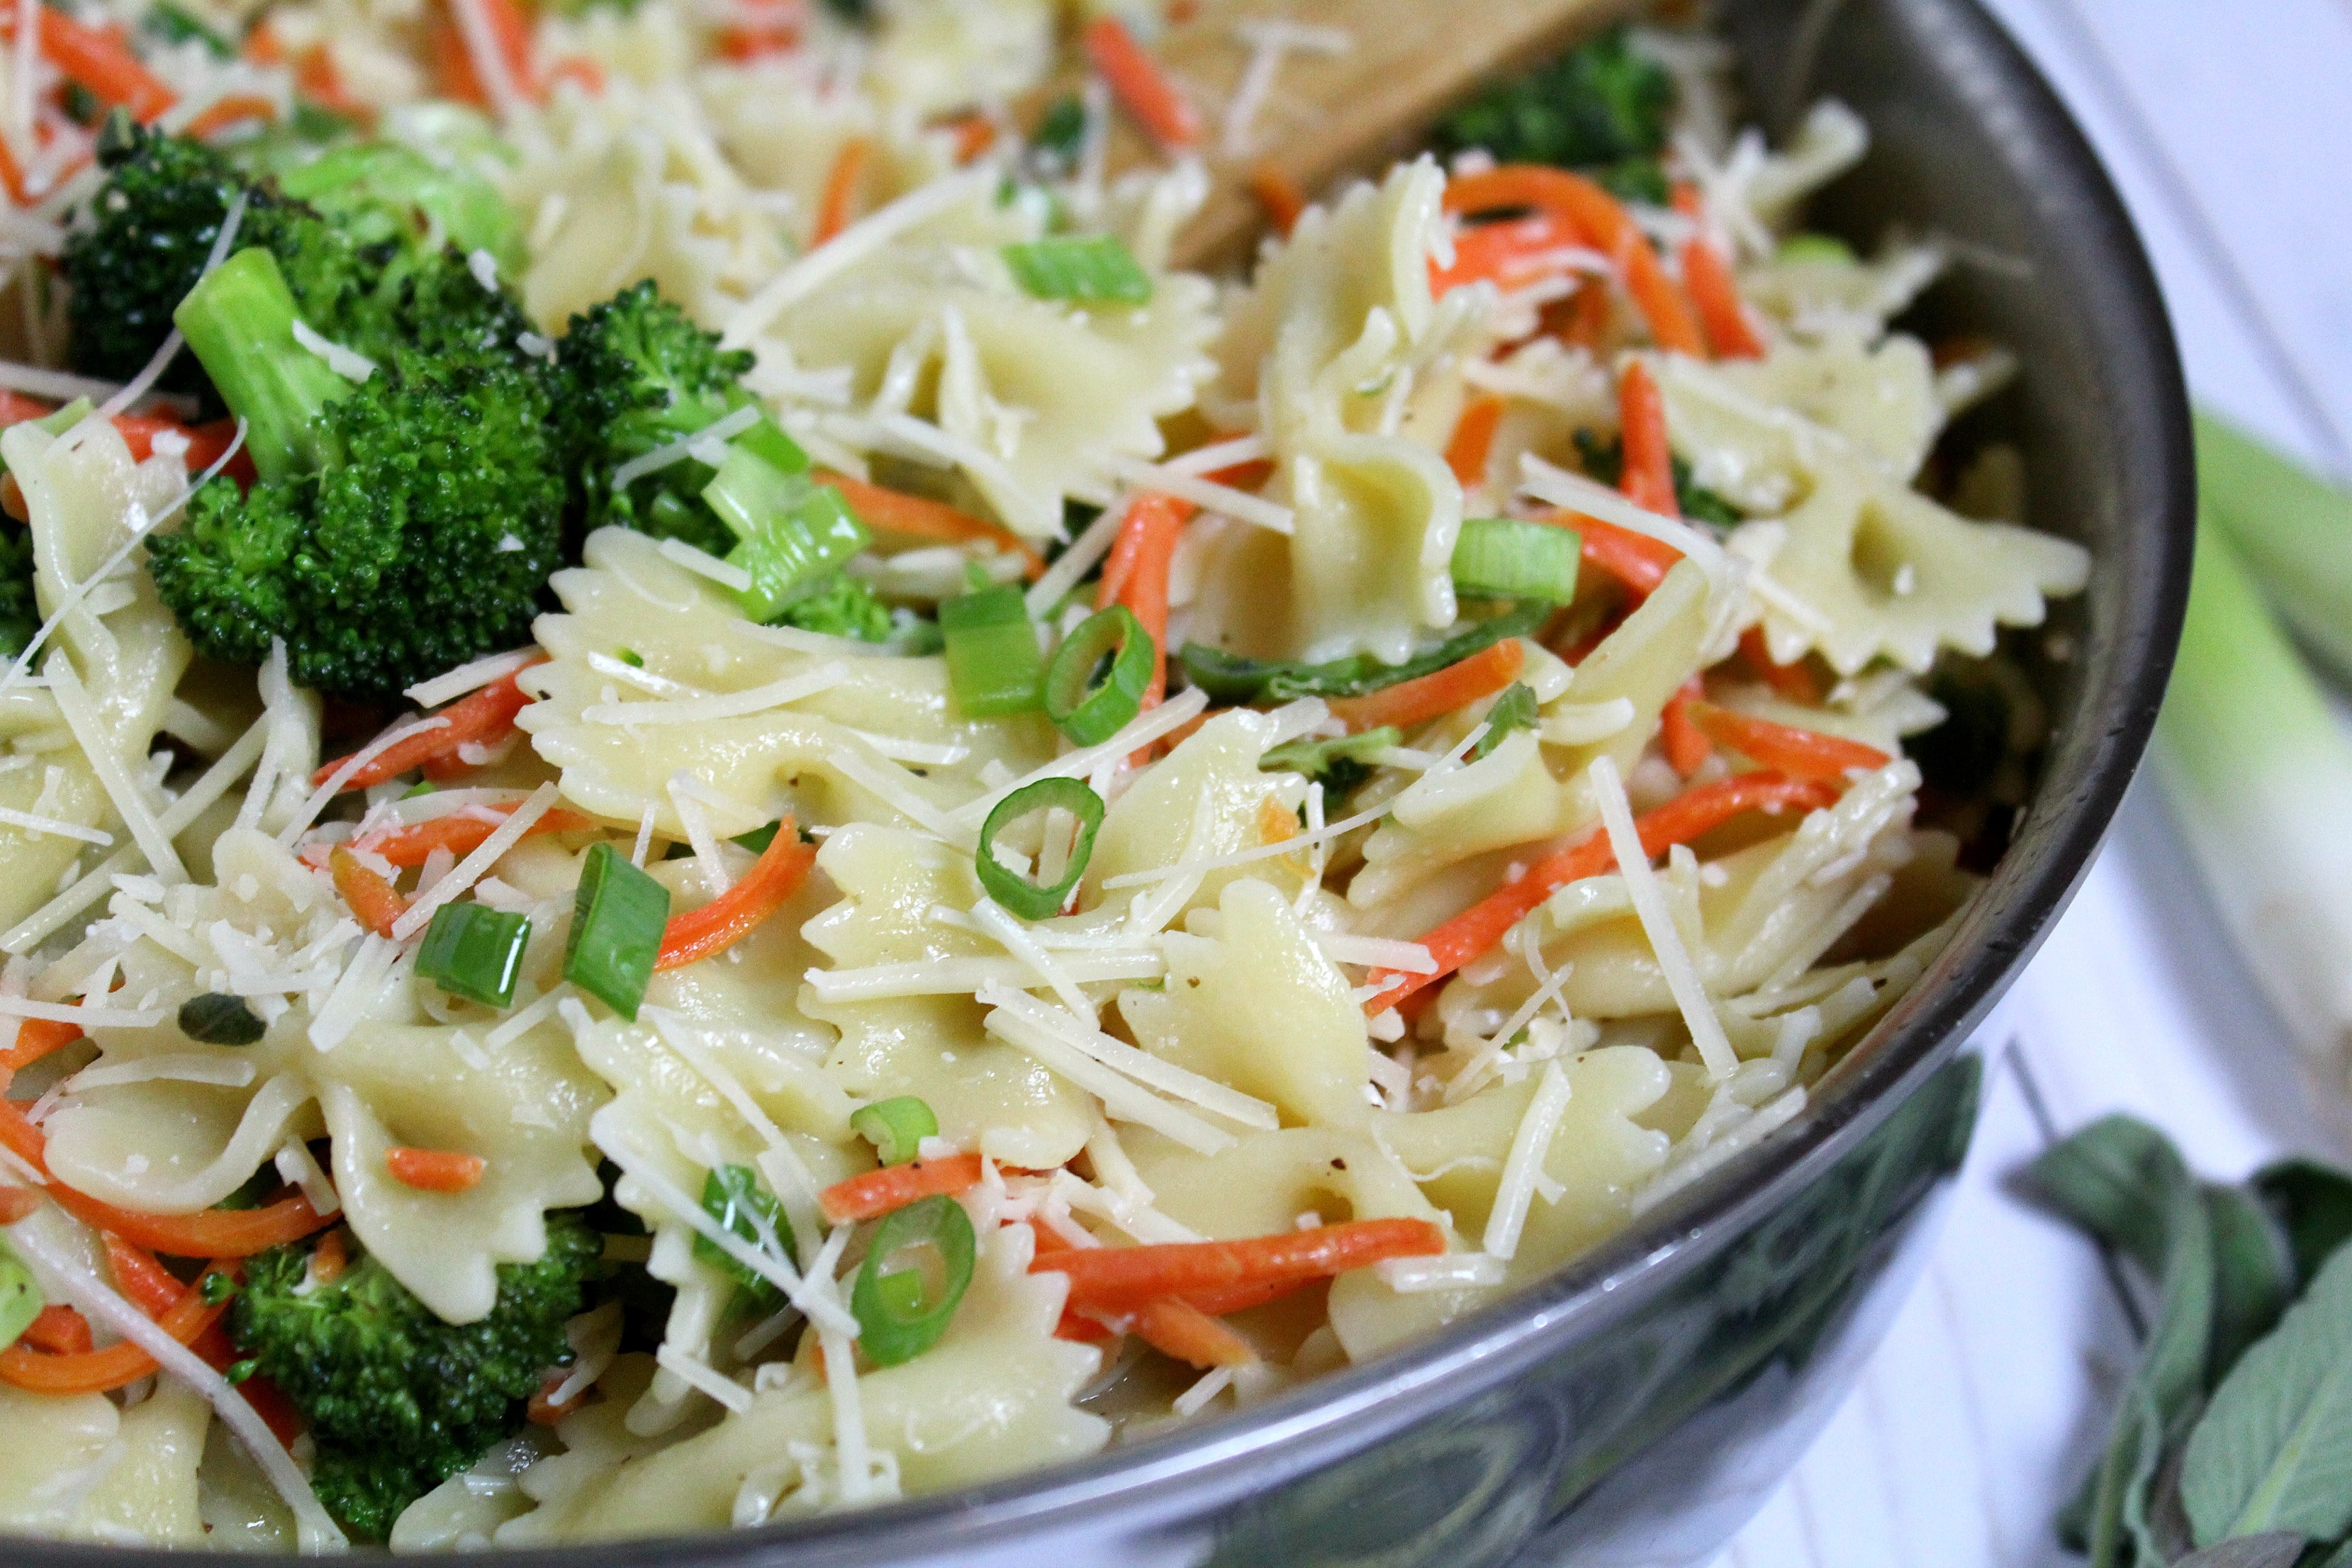 Combine veggies with pasta. Dress with shredded parmesan cheese and lemon dressing. 